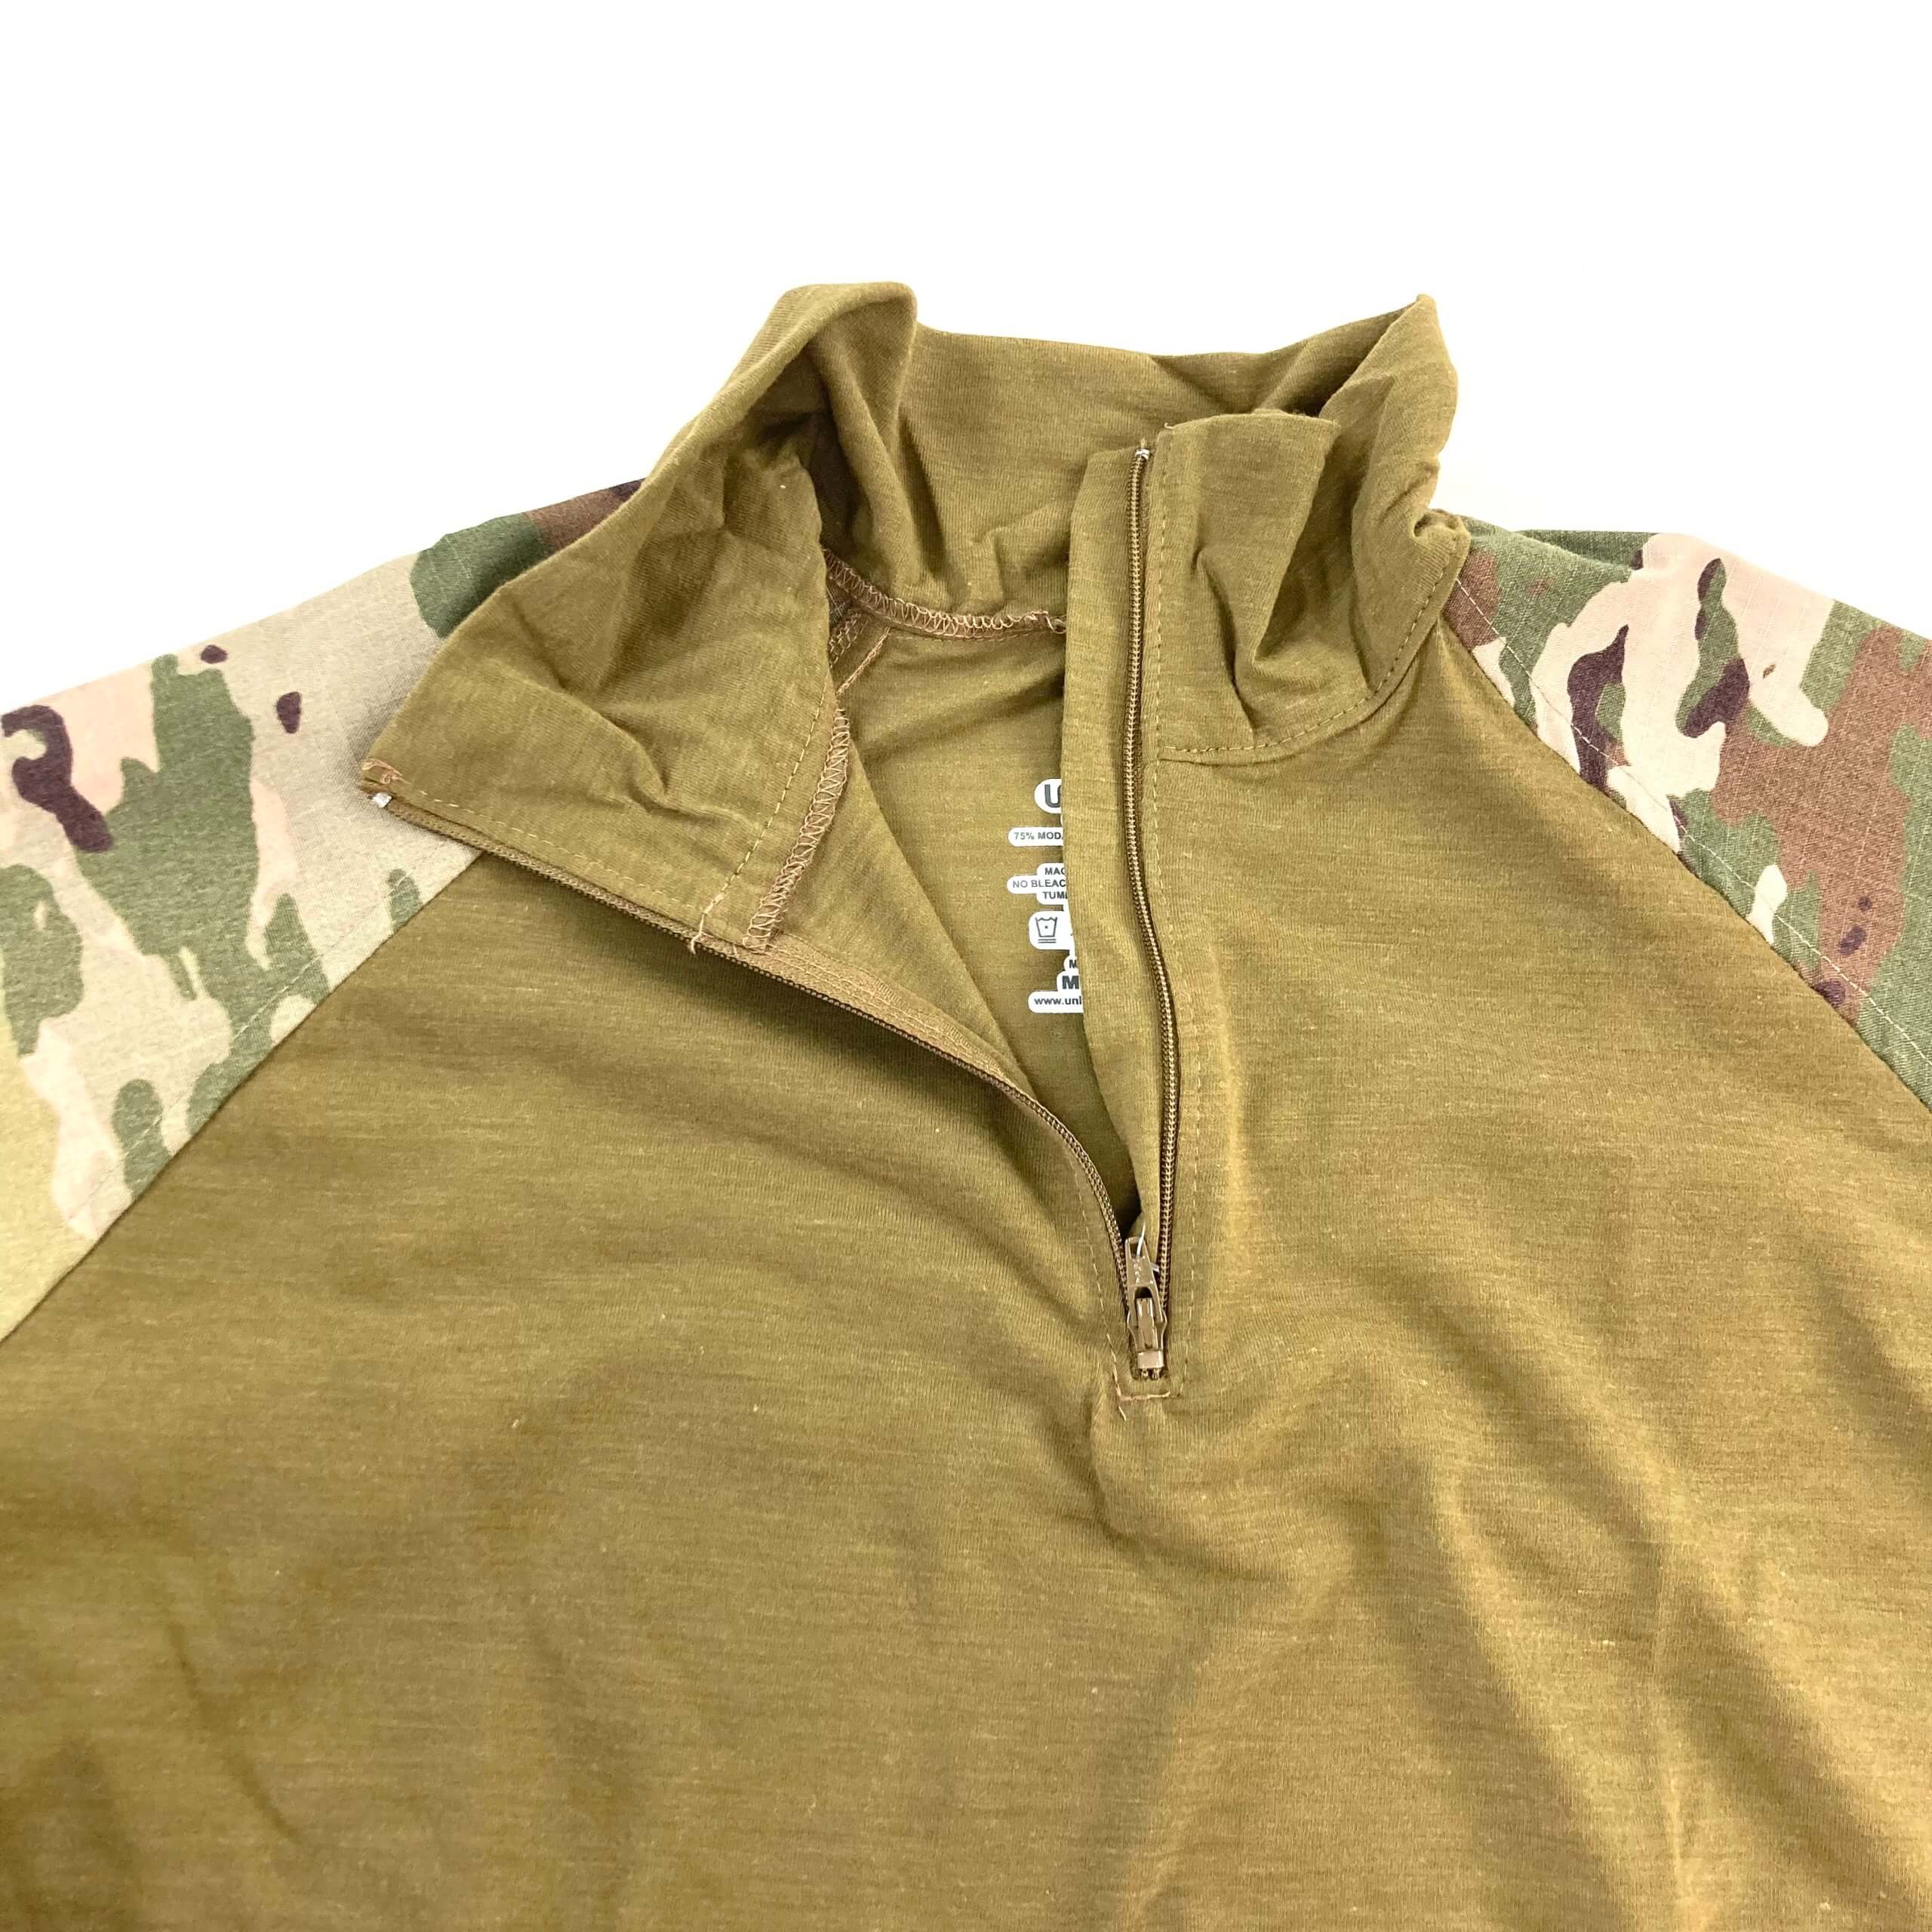 United Join Forces Fortiflame 1/4 Zip Combat Shirt, Coyote/OCP